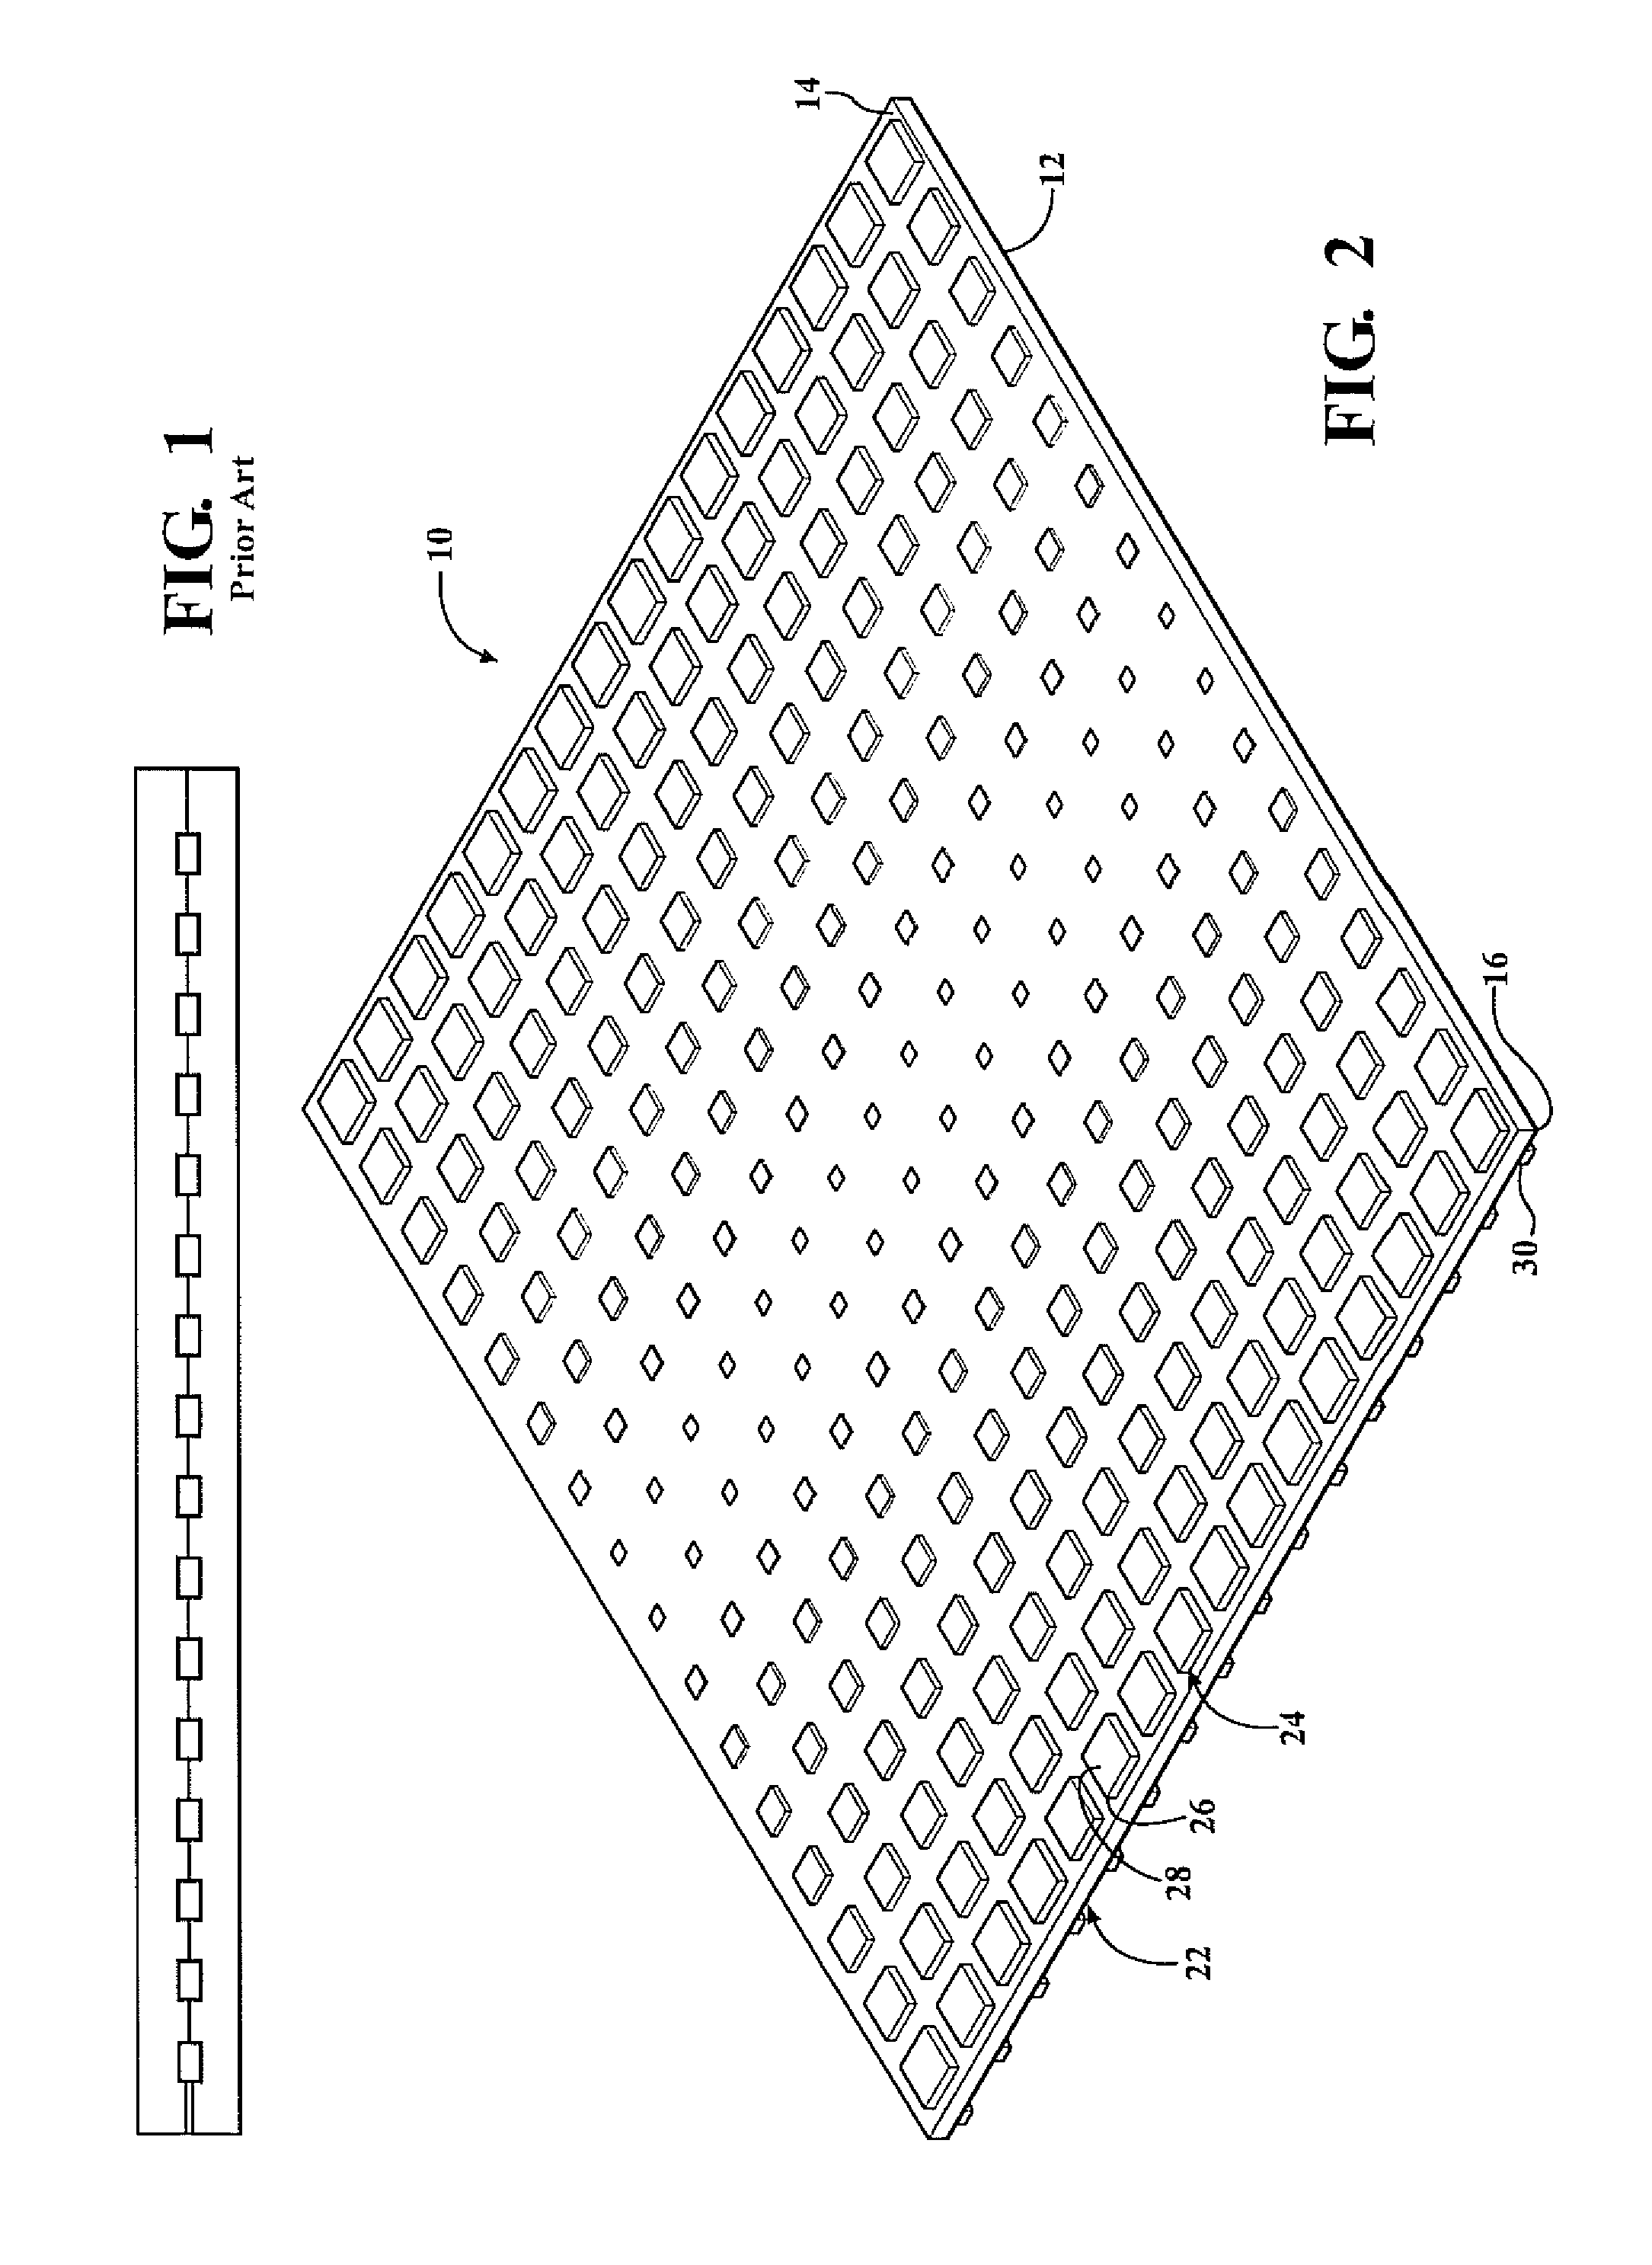 Antenna with tapered array